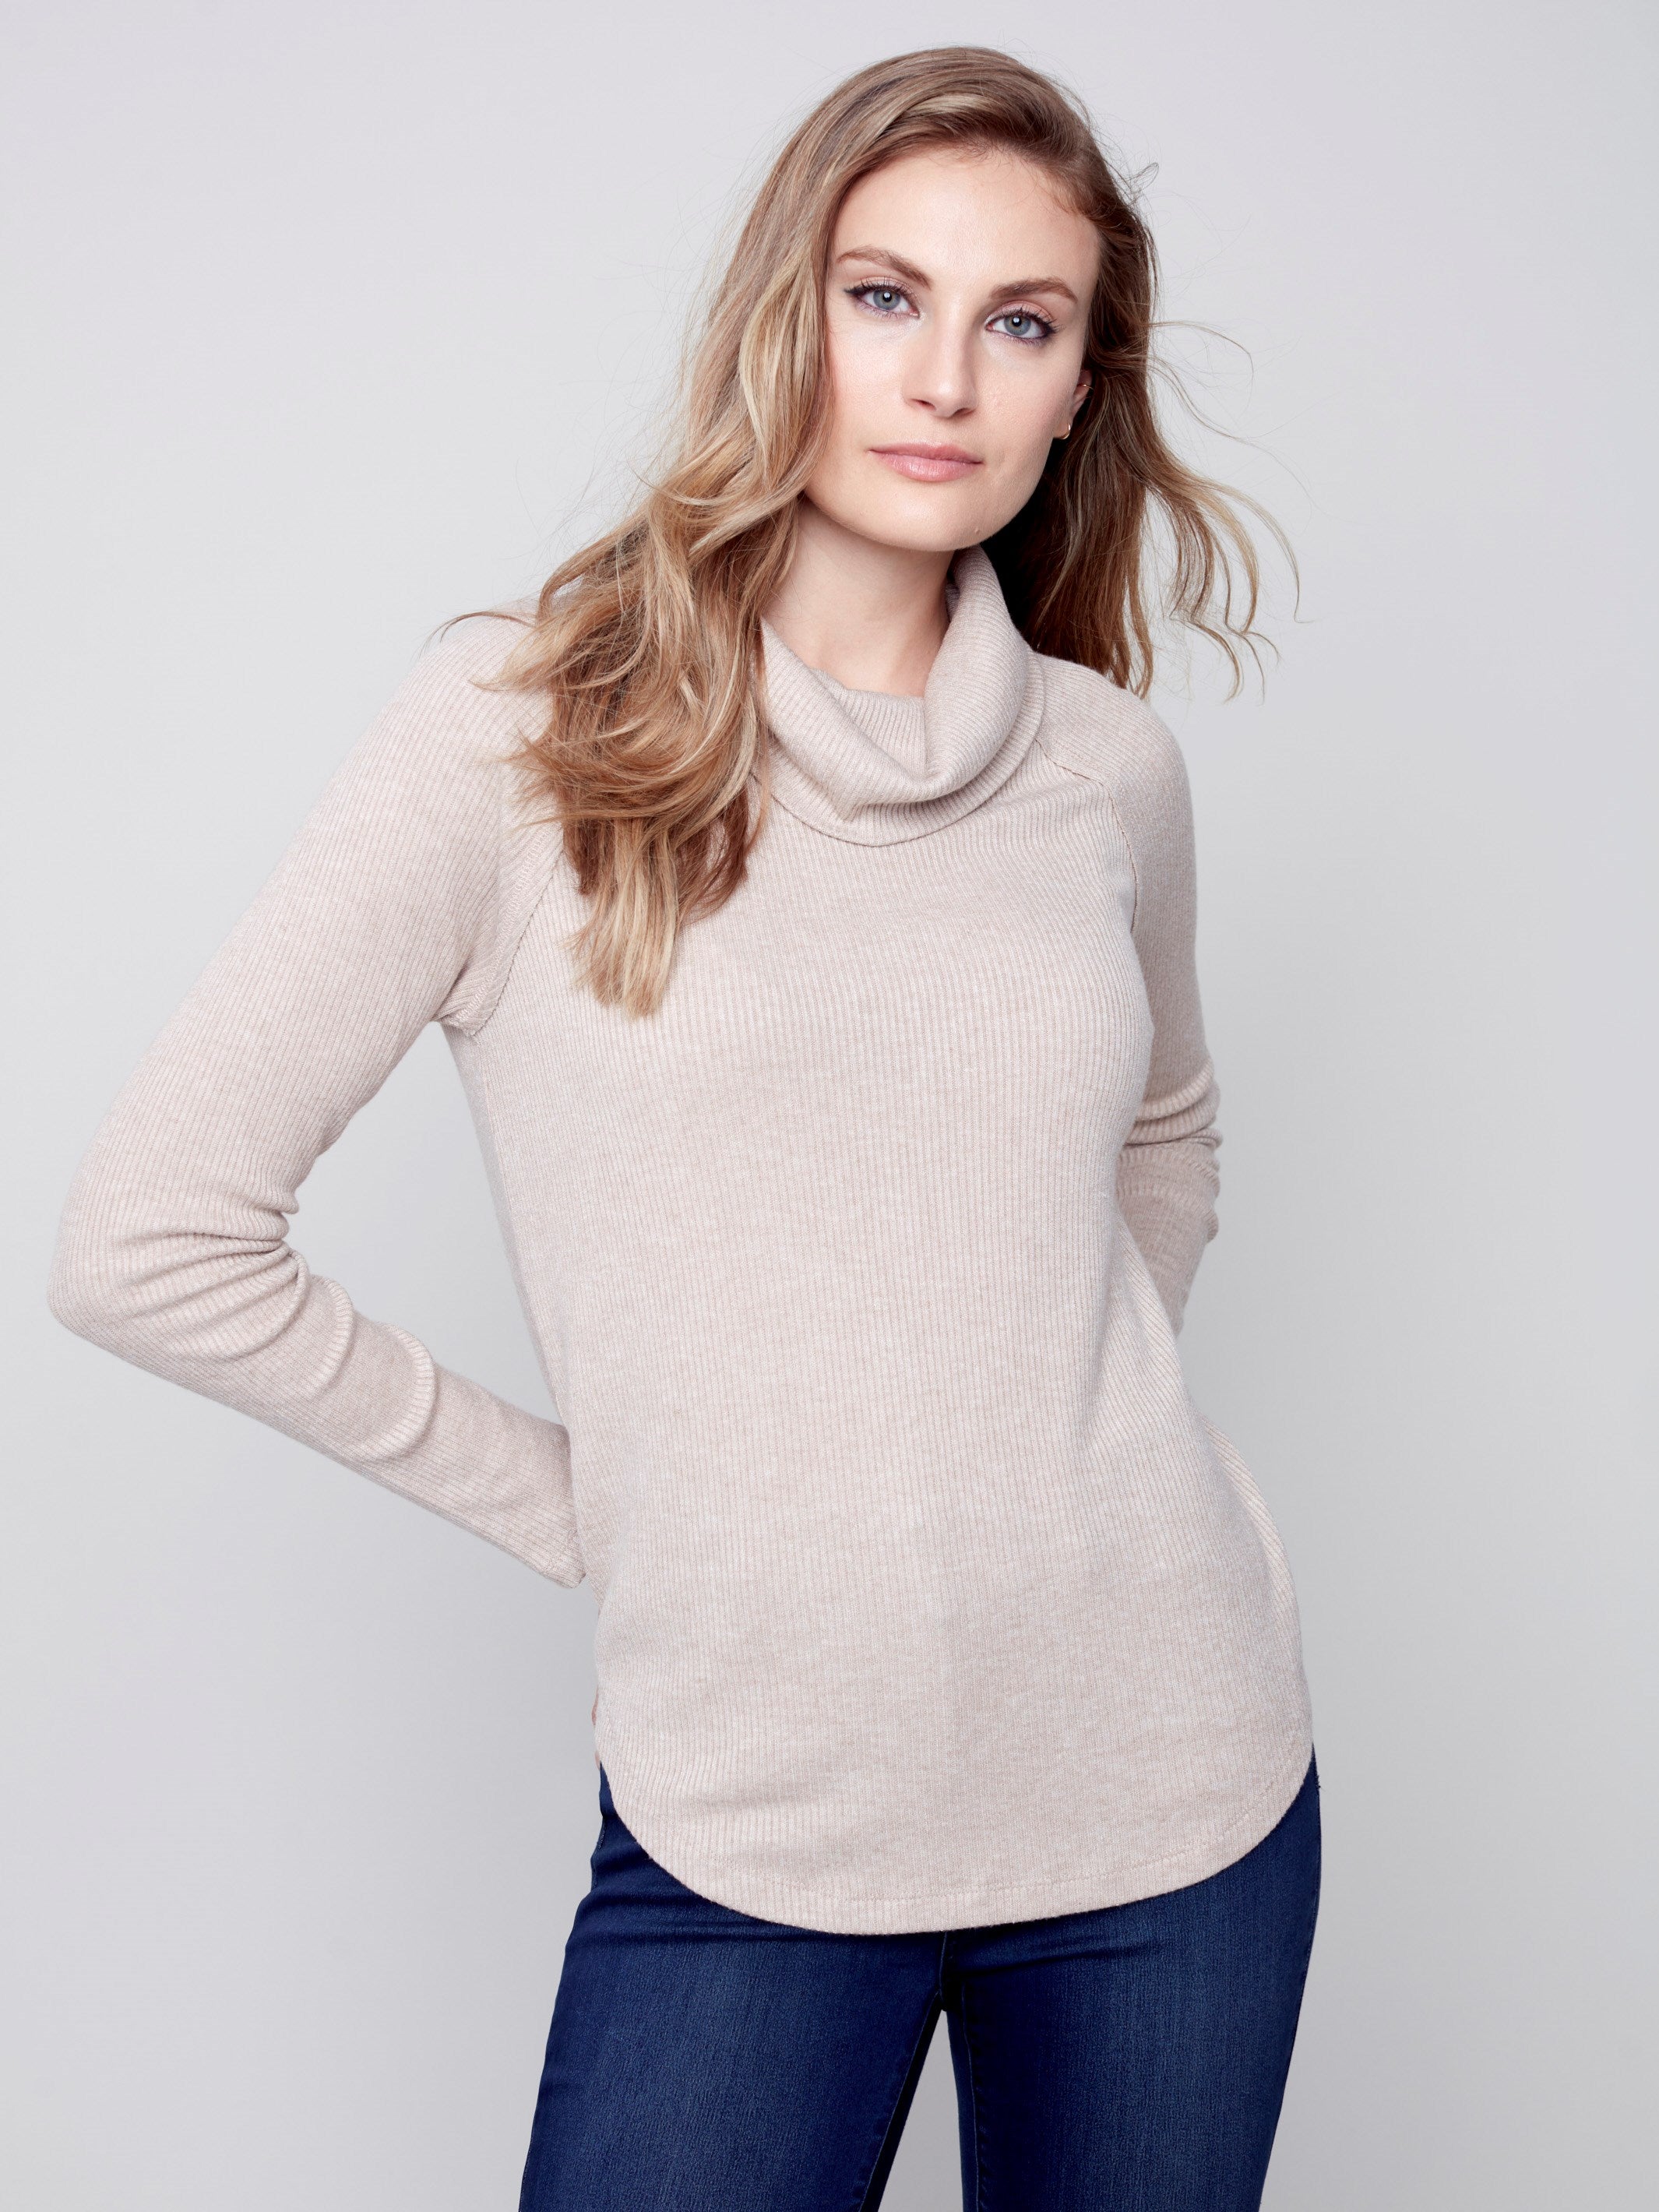 Ribbed Cowl Neck Top - Truffle